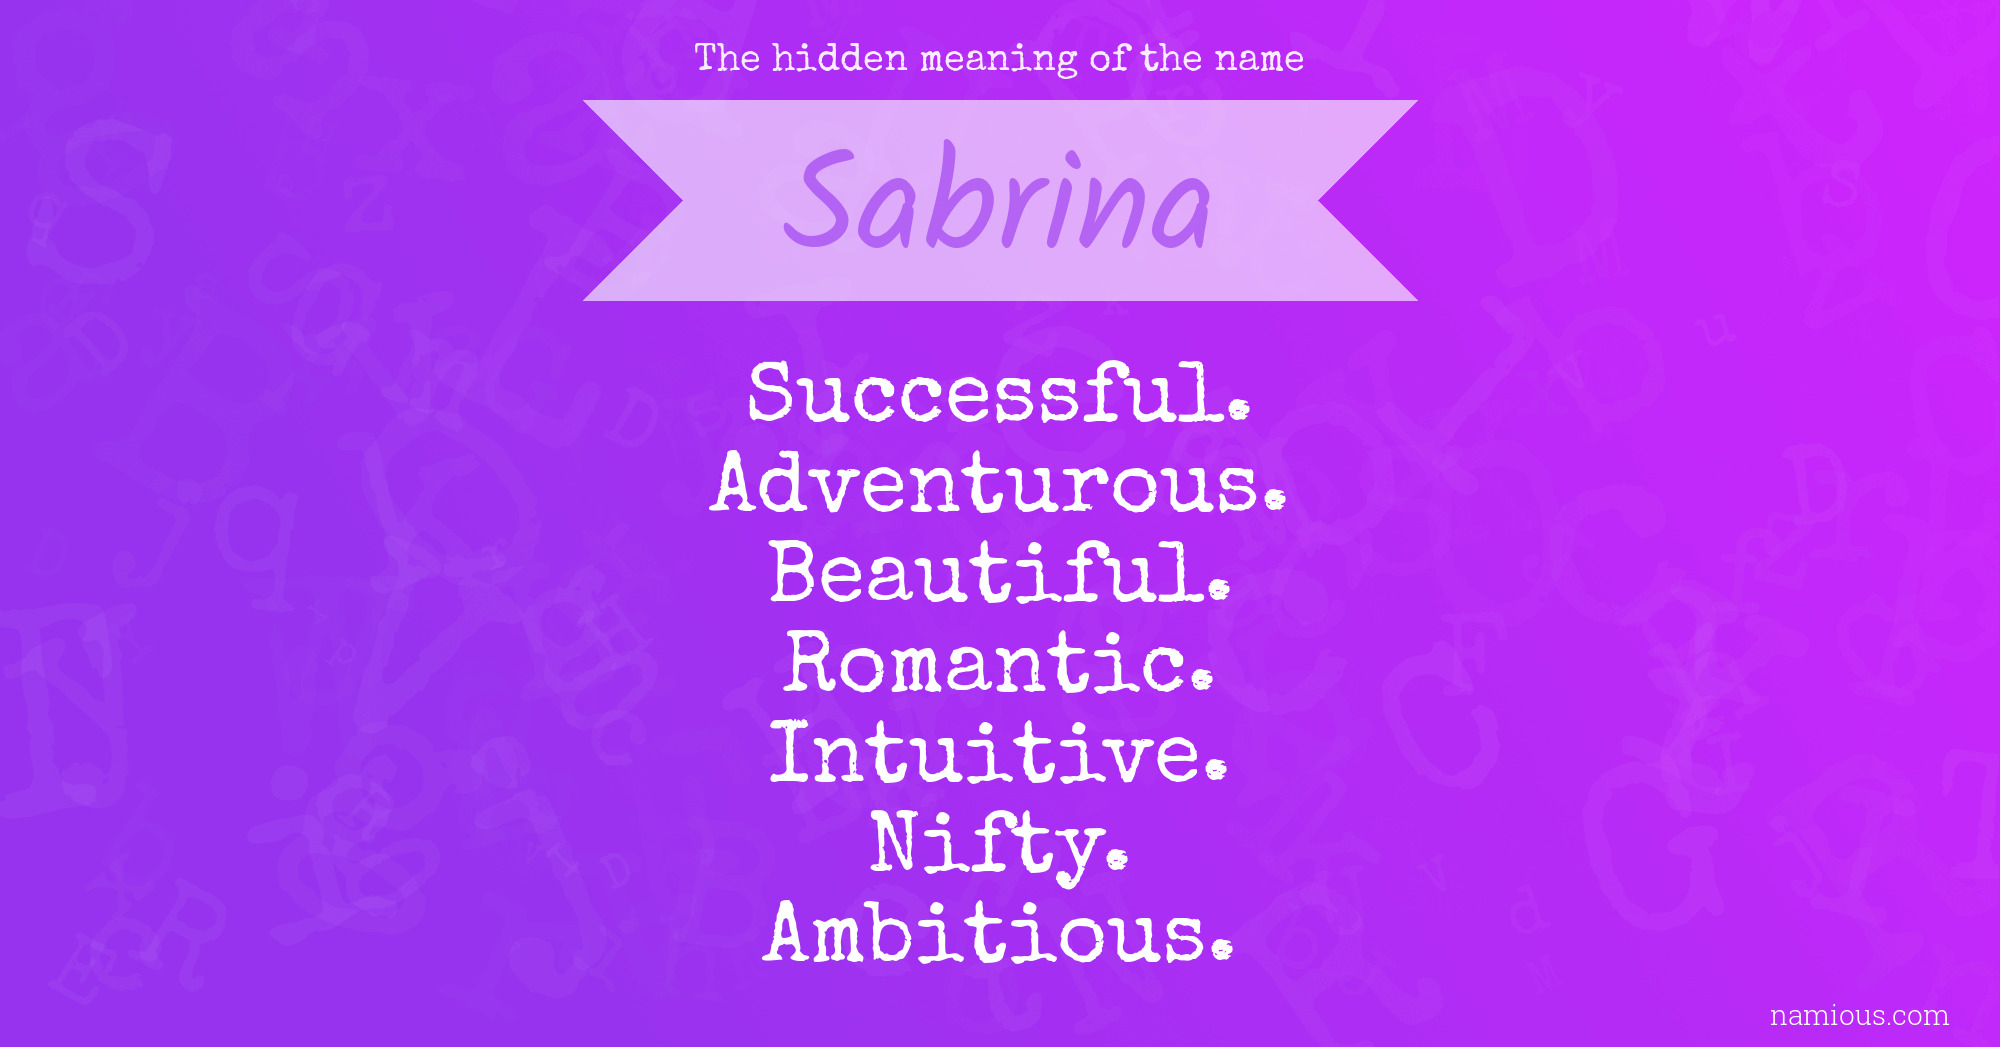 The hidden meaning of the name Sabrina